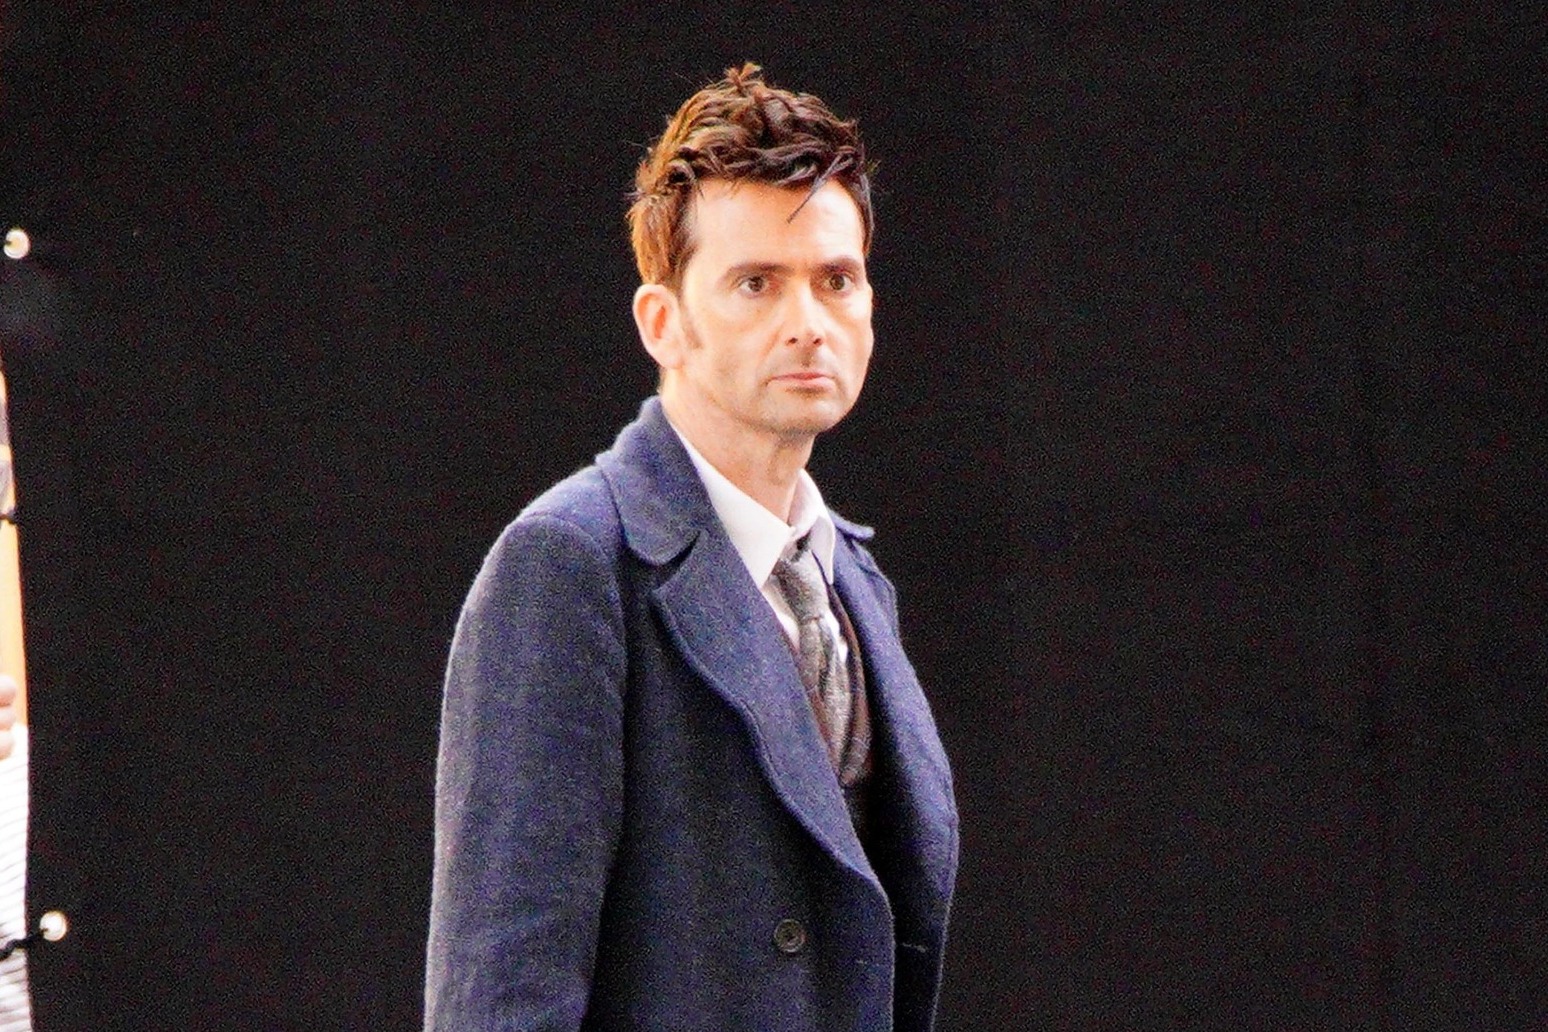 David Tennant pictured filming scenes on set of Doctor Who 